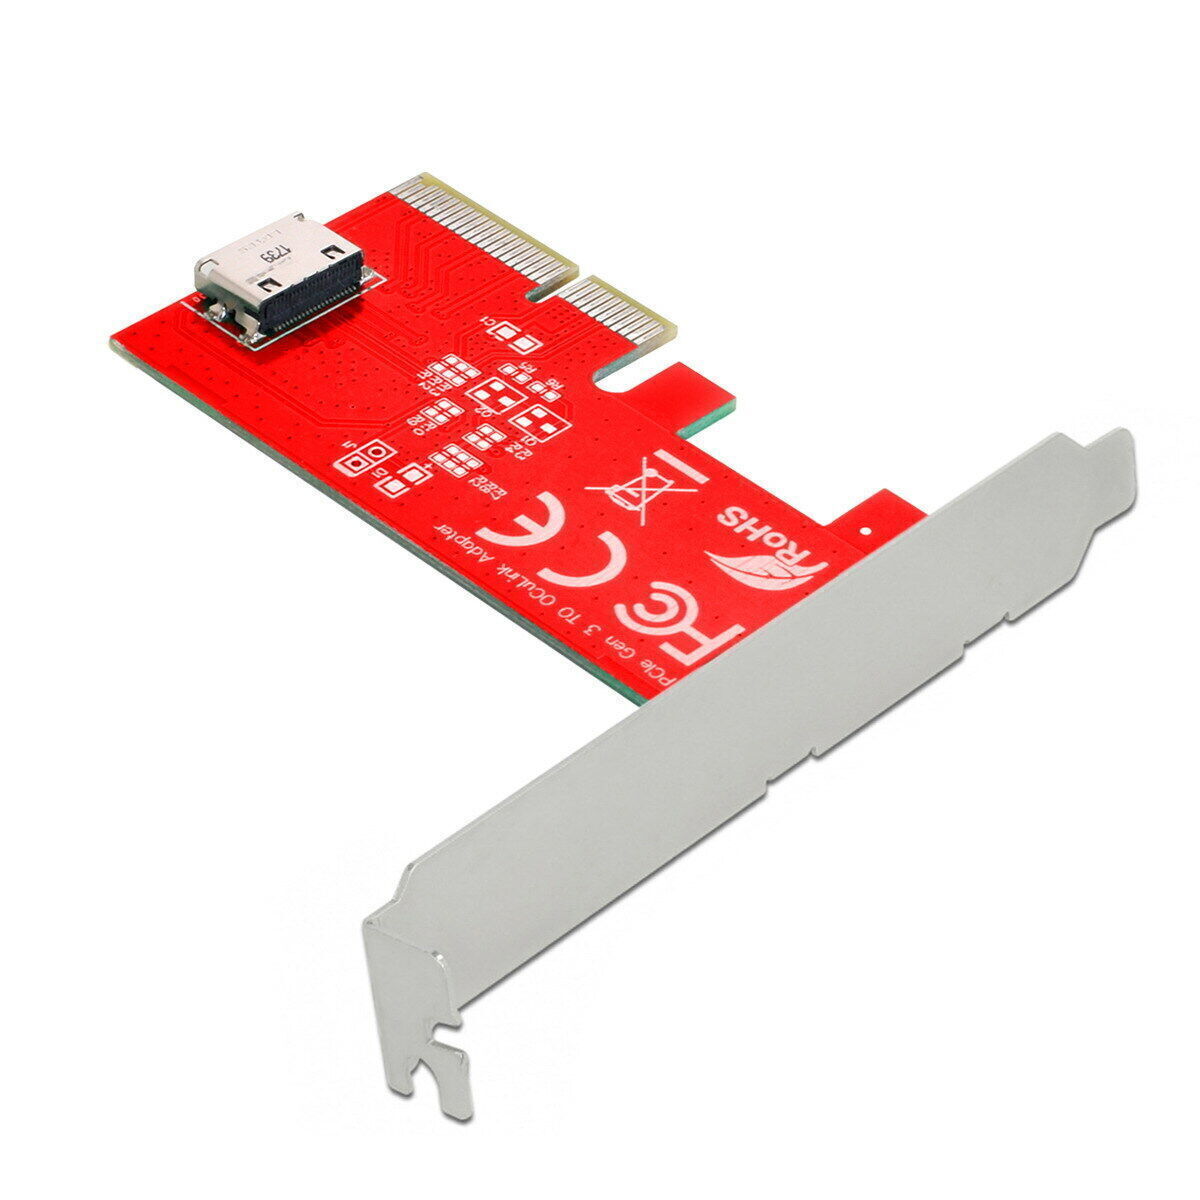 To Oculink SFF-8612 SFF-8611 Host Adapter Express 4.0 X4 for Pie SSD PCI-E 3.0